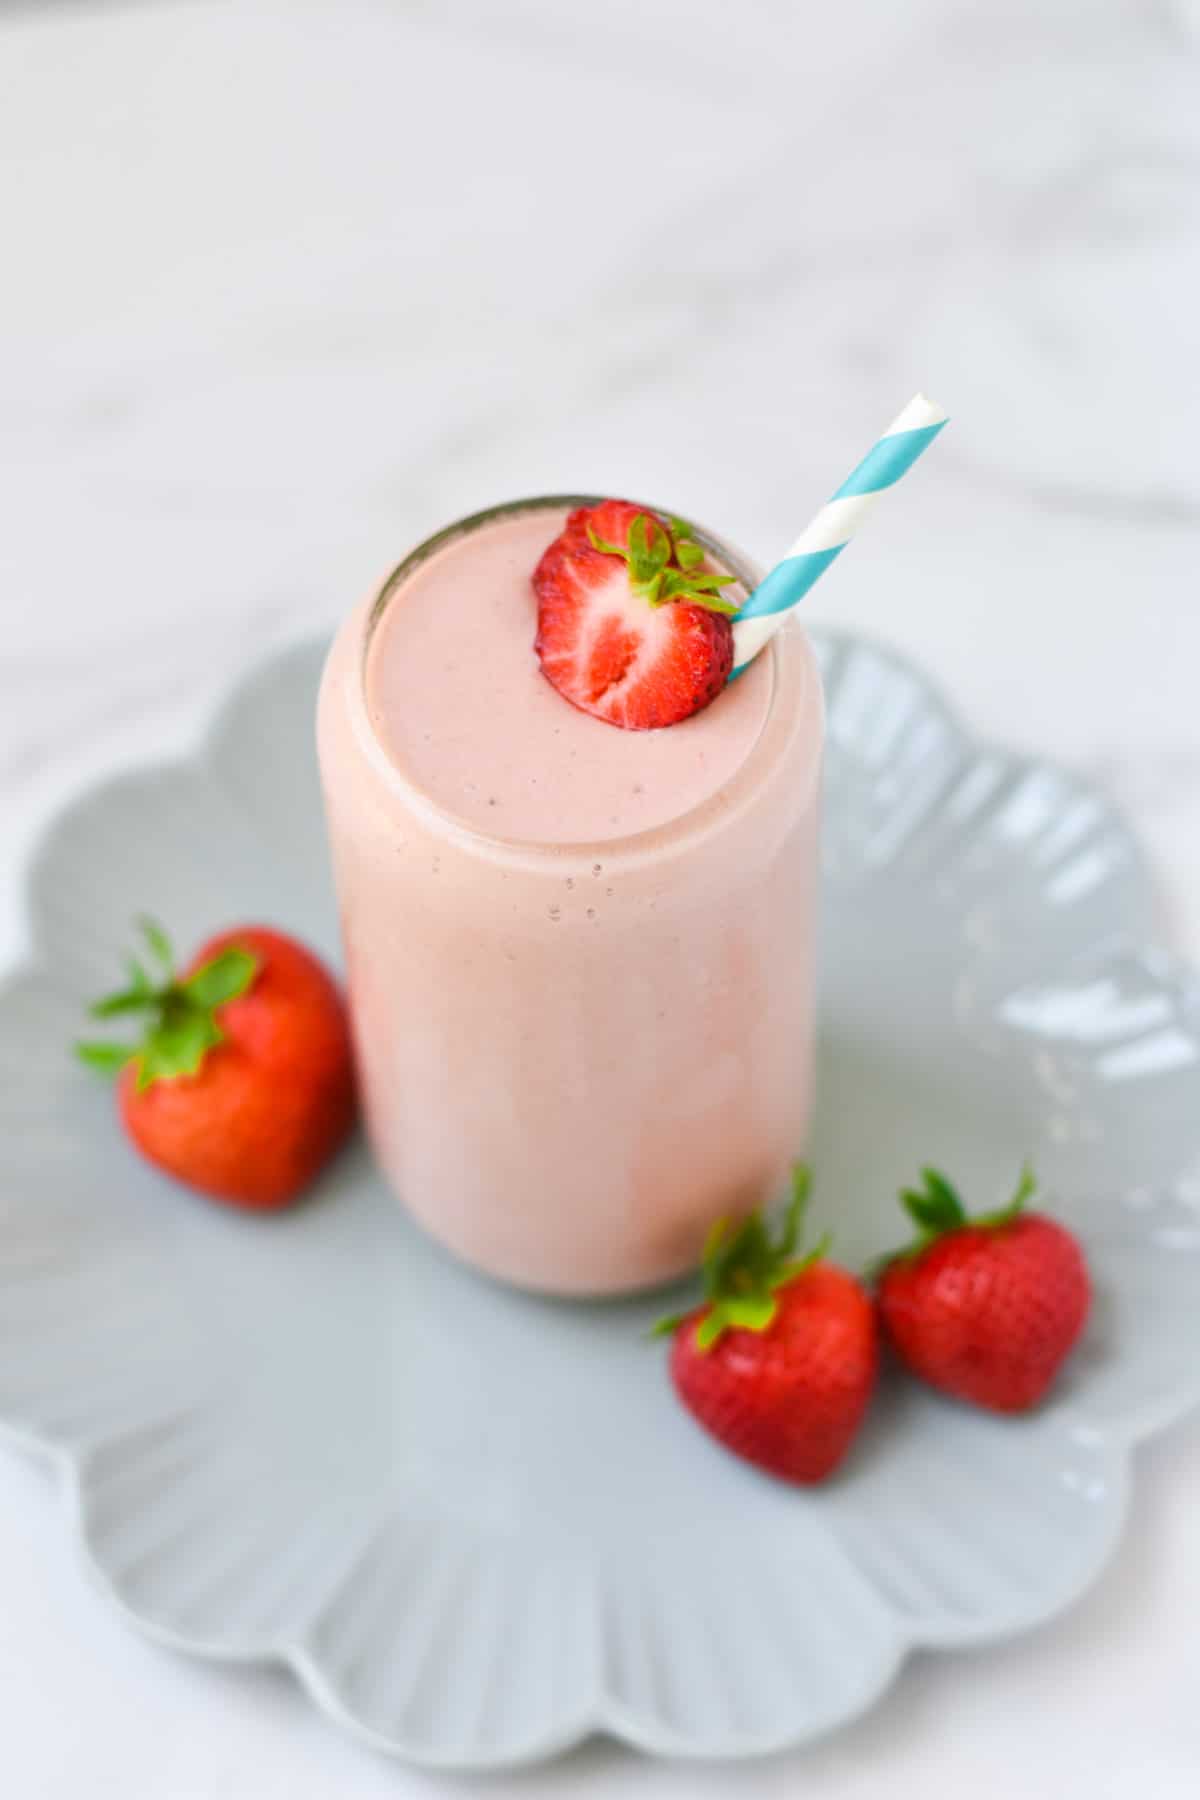 Strawberries on top of a pink smoothie with a blue and white straw and a marble table.